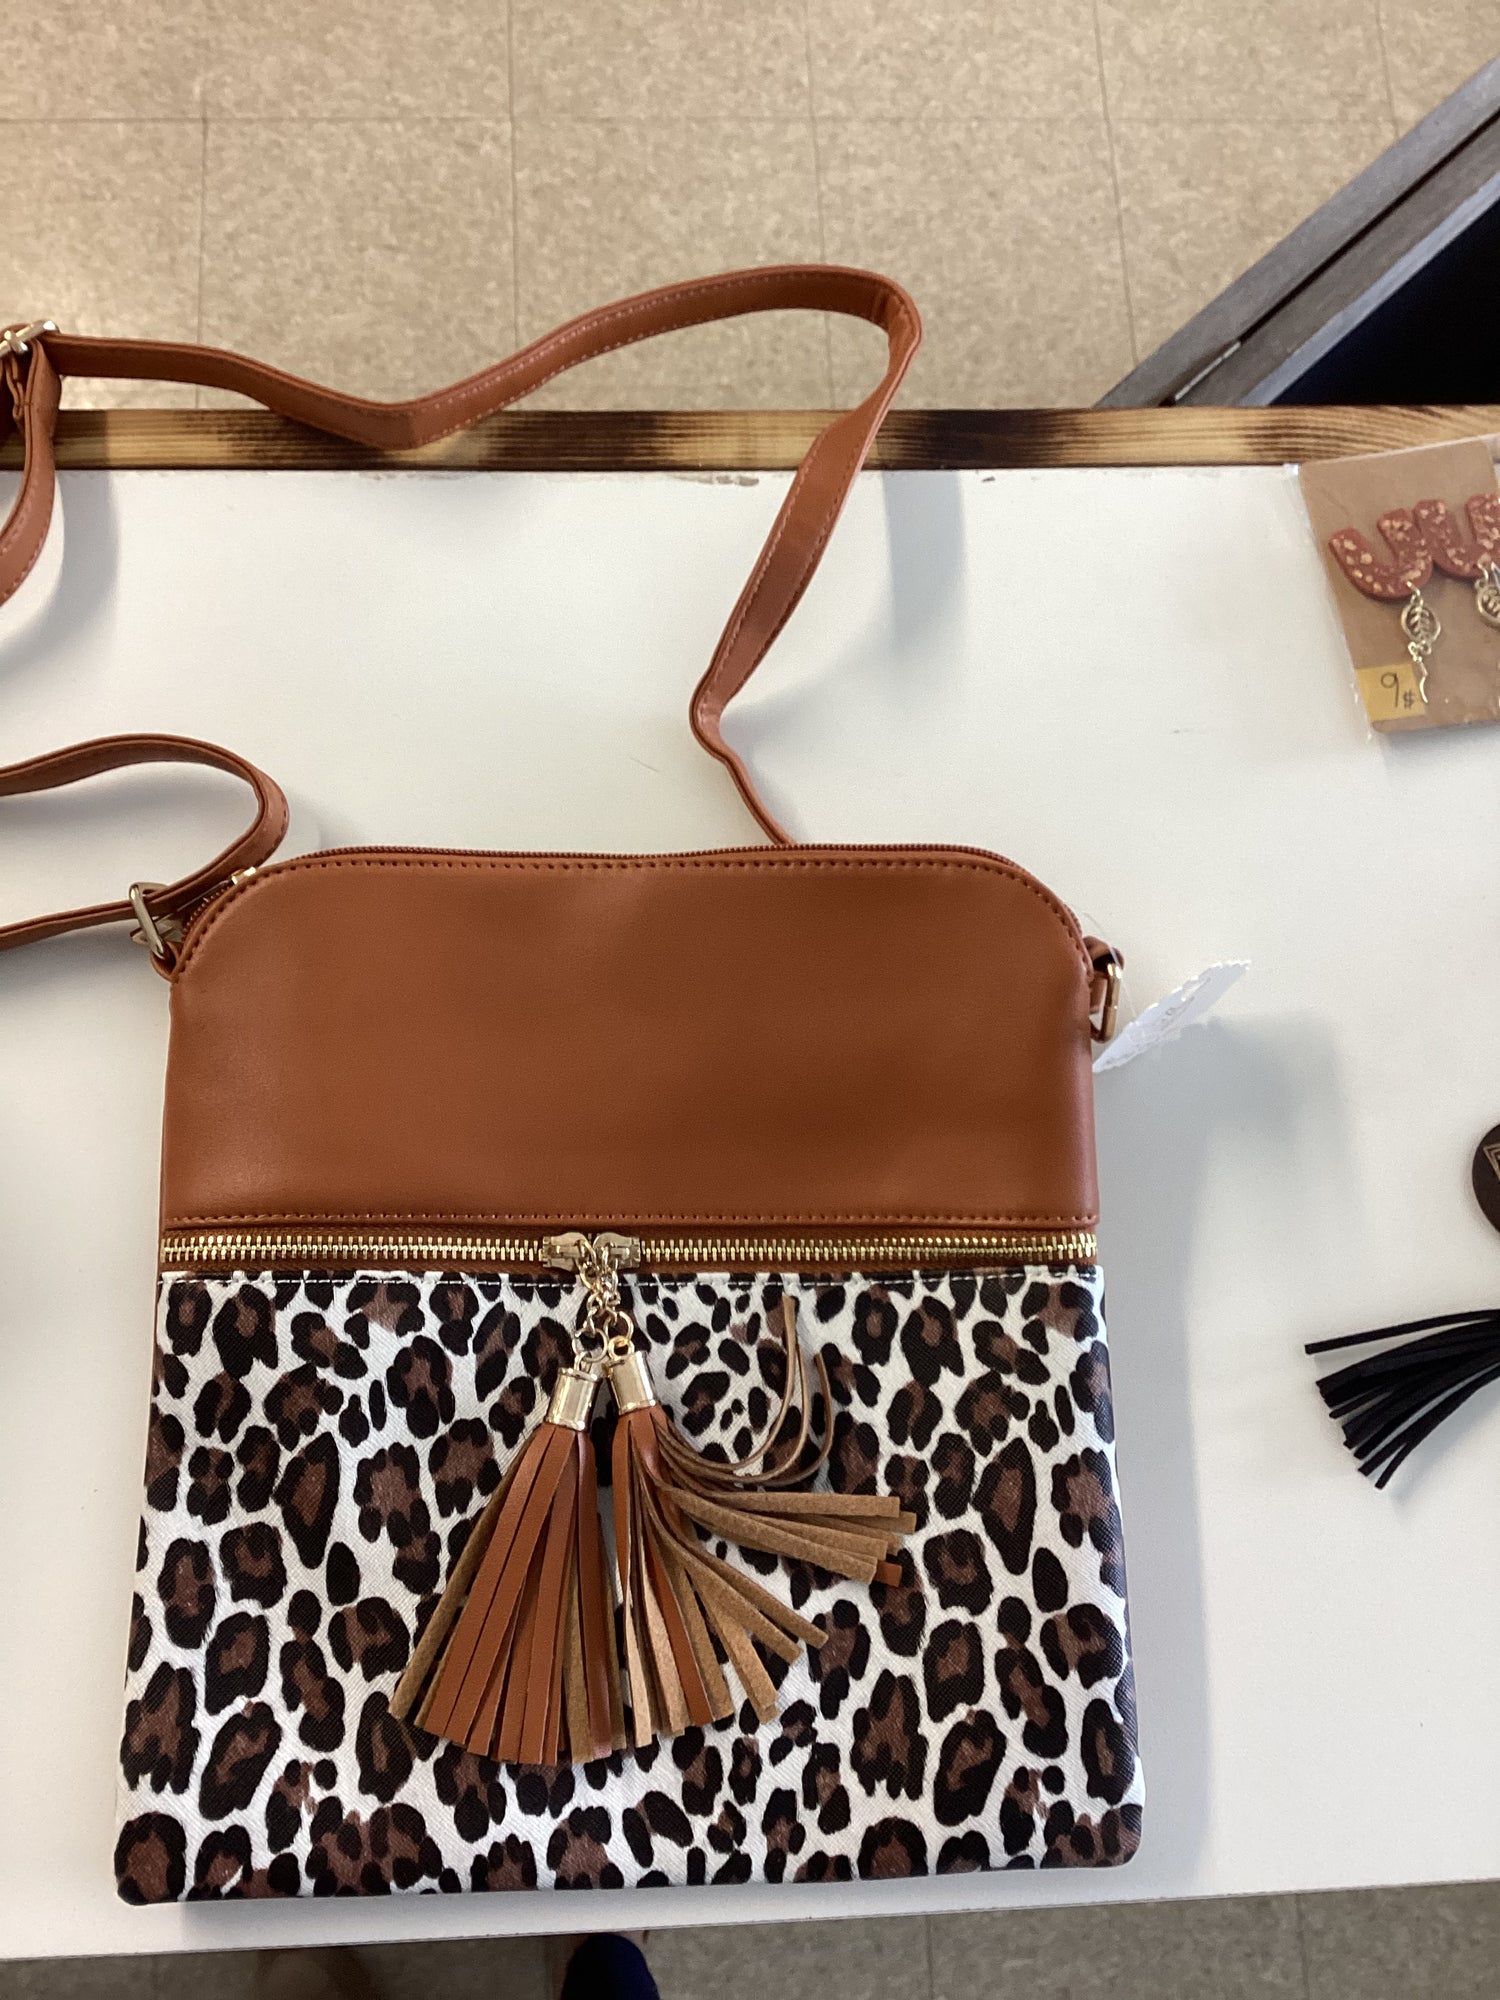 Brown and Leopard Print Crossbody Handbag with Tassels - Boutique 276